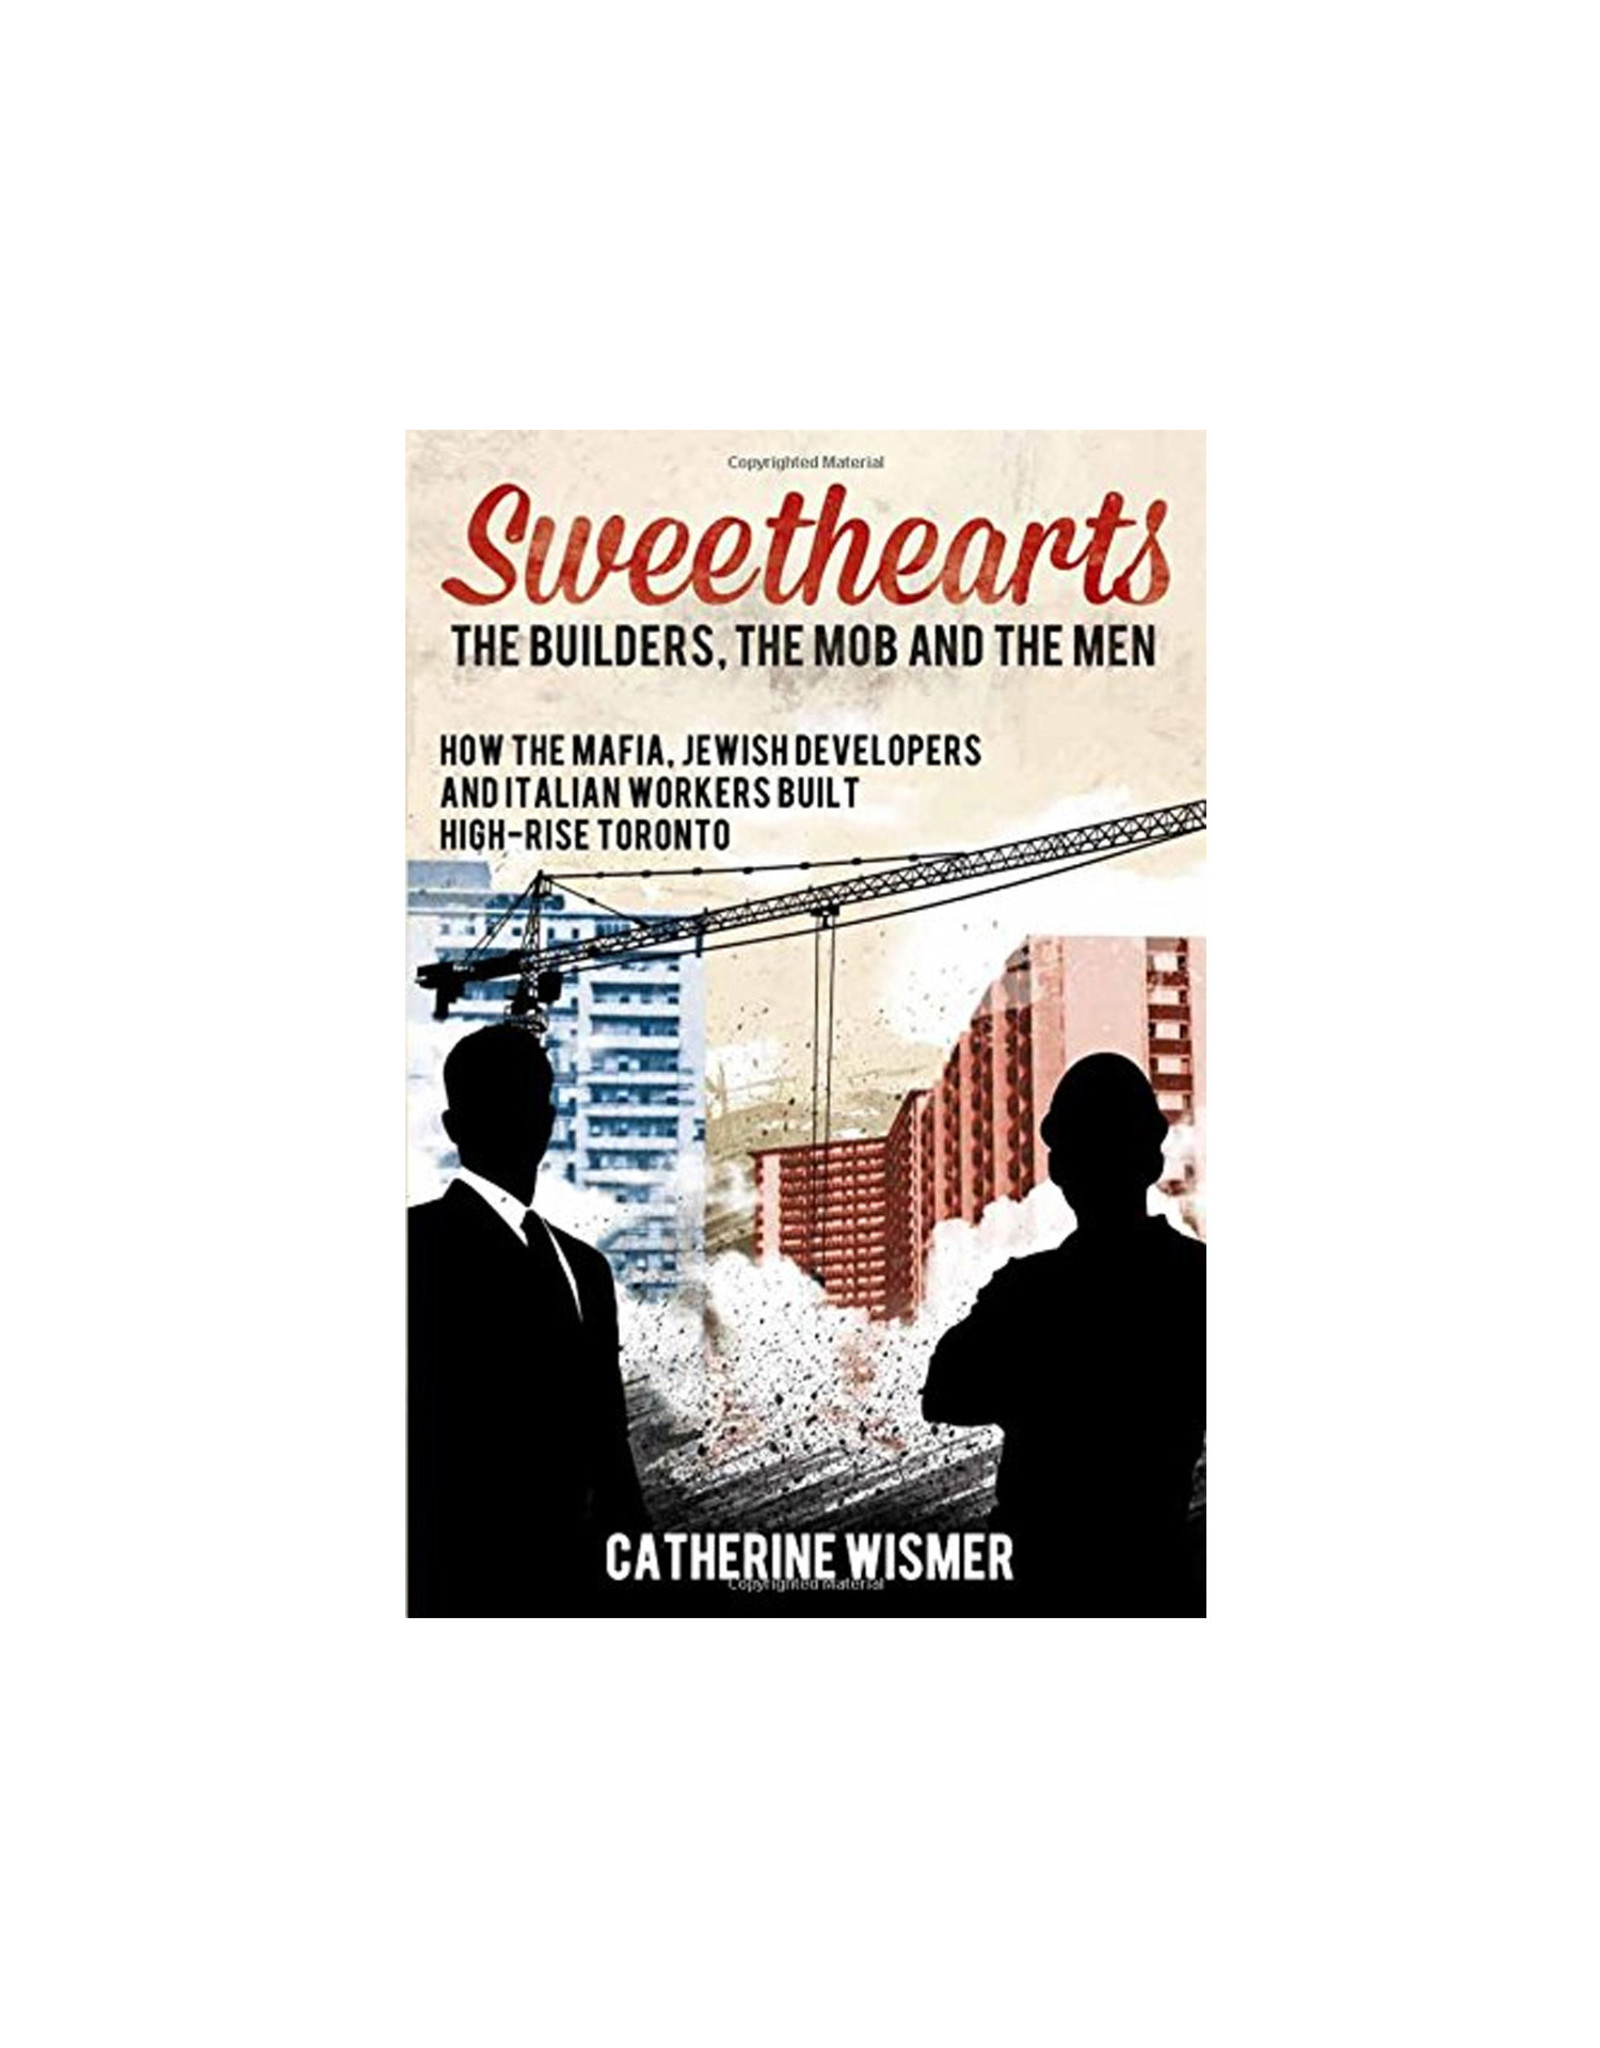 Sweethearts: The Builders, The Mob and the Men